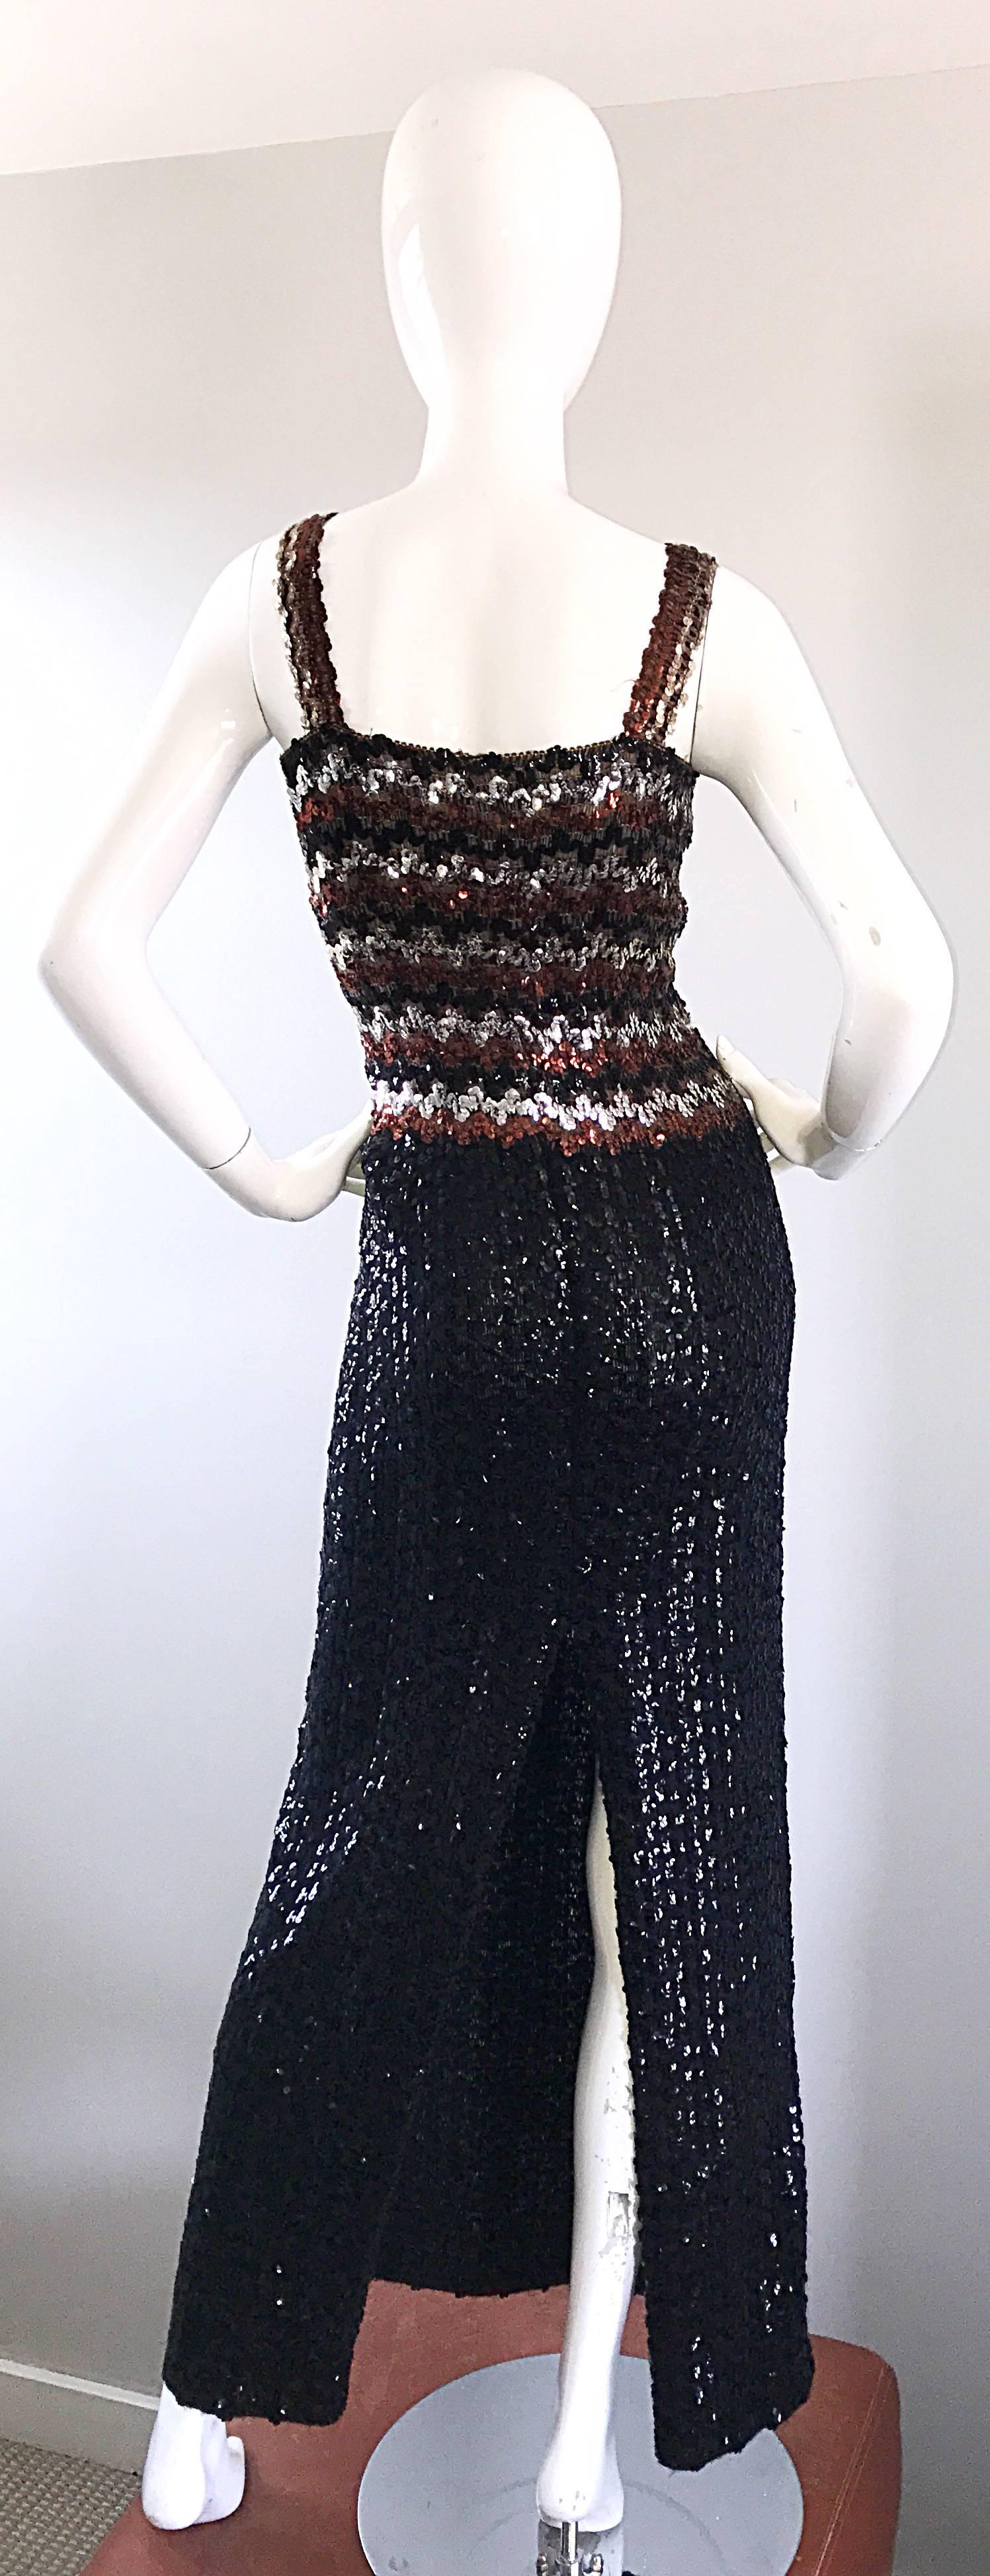 1970s Sequined Black + Brown + Silver Vintage 70s Knit Sexy Evening Gown Dress In Excellent Condition For Sale In San Diego, CA